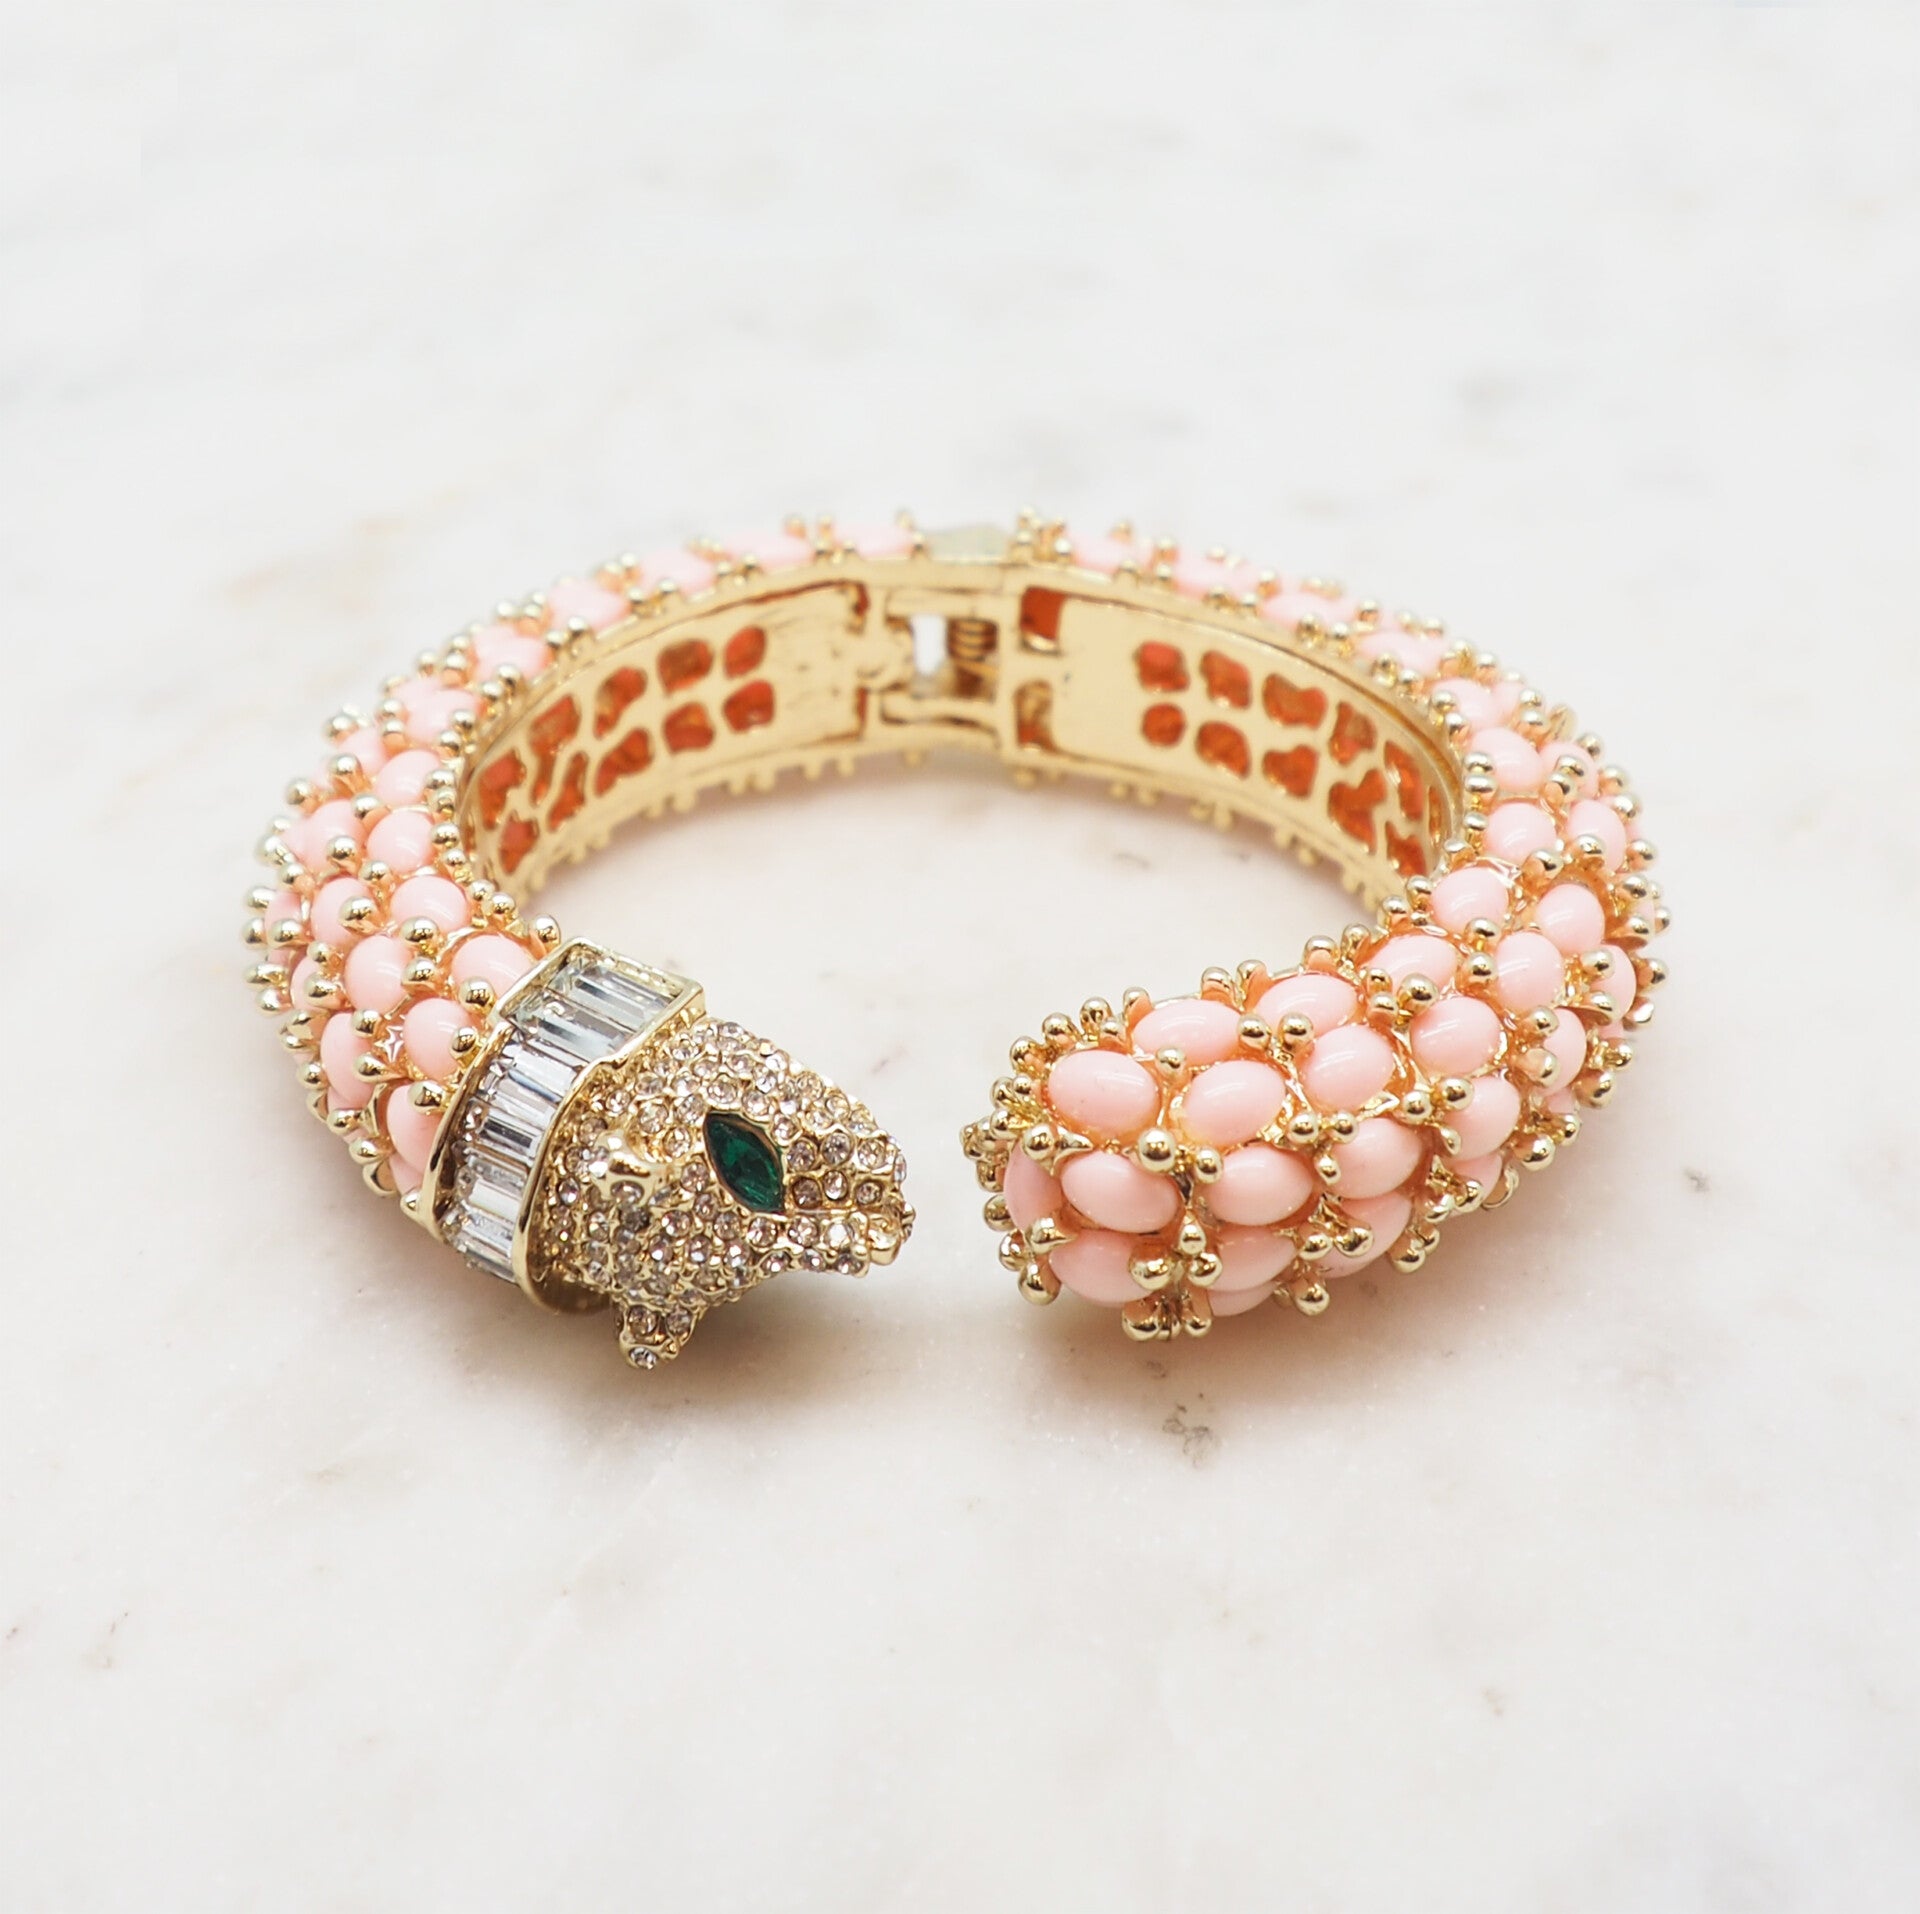 The Tiger Bangle - Pale pink